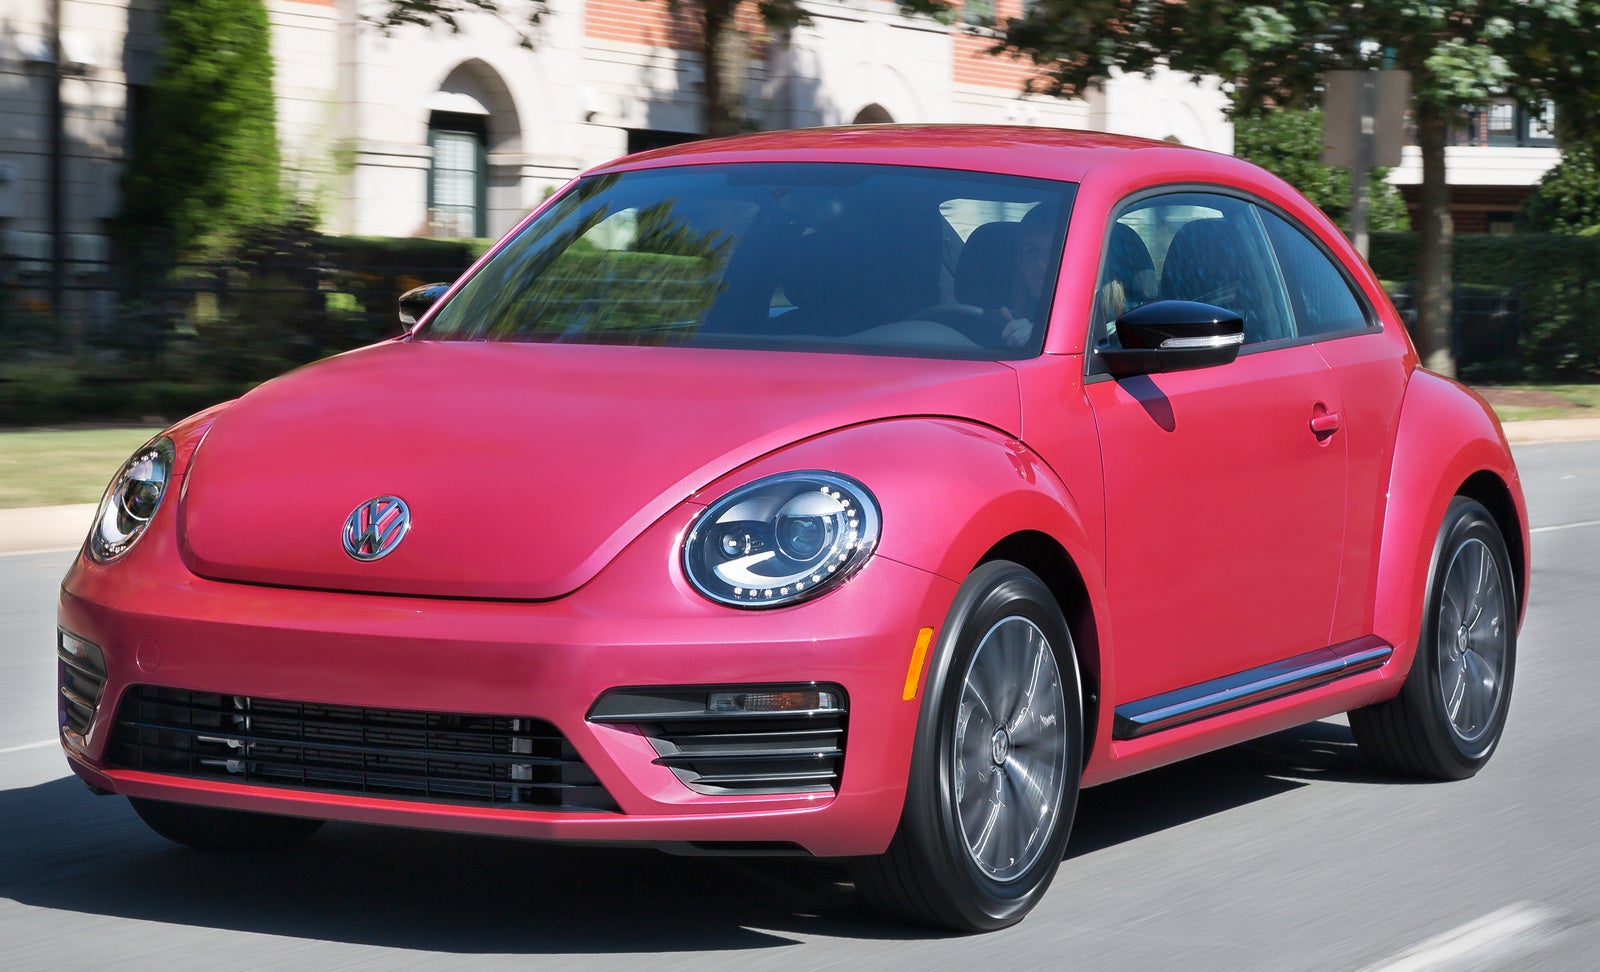 Used 2017 Volkswagen Beetle For Sale With Photos Cargurus